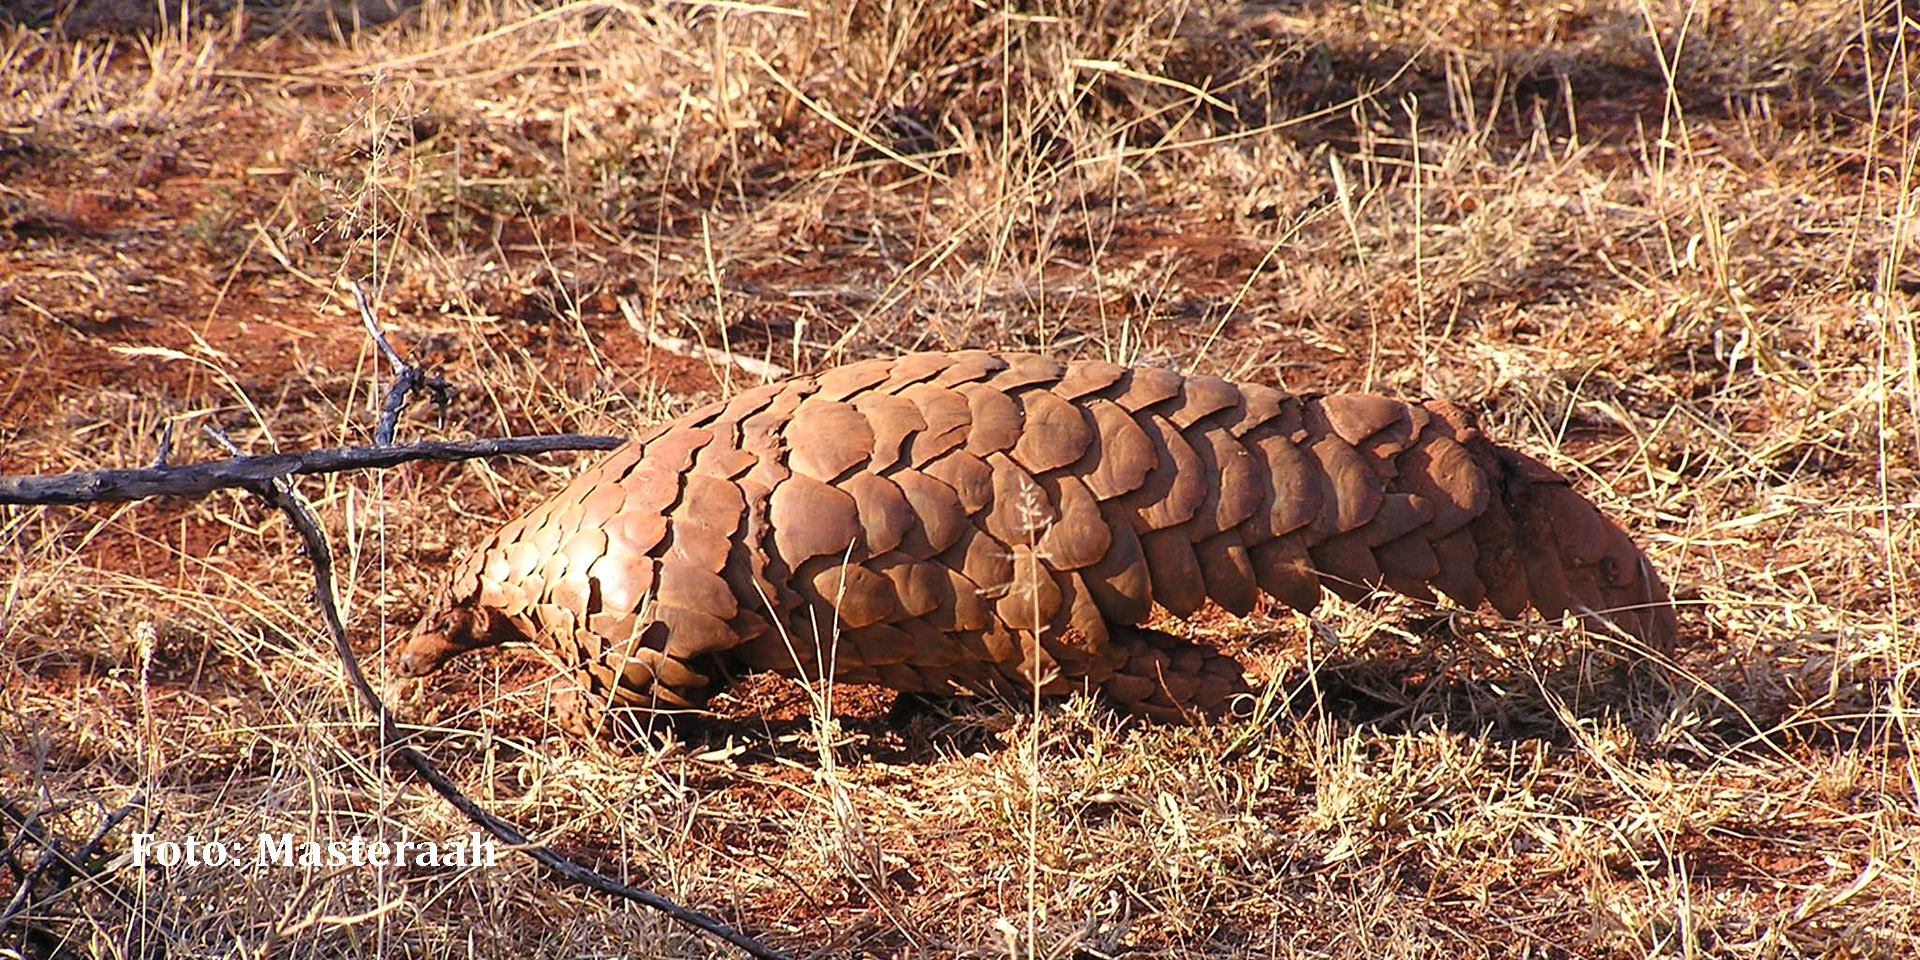 Schuppentier (pangolin) in Namibia